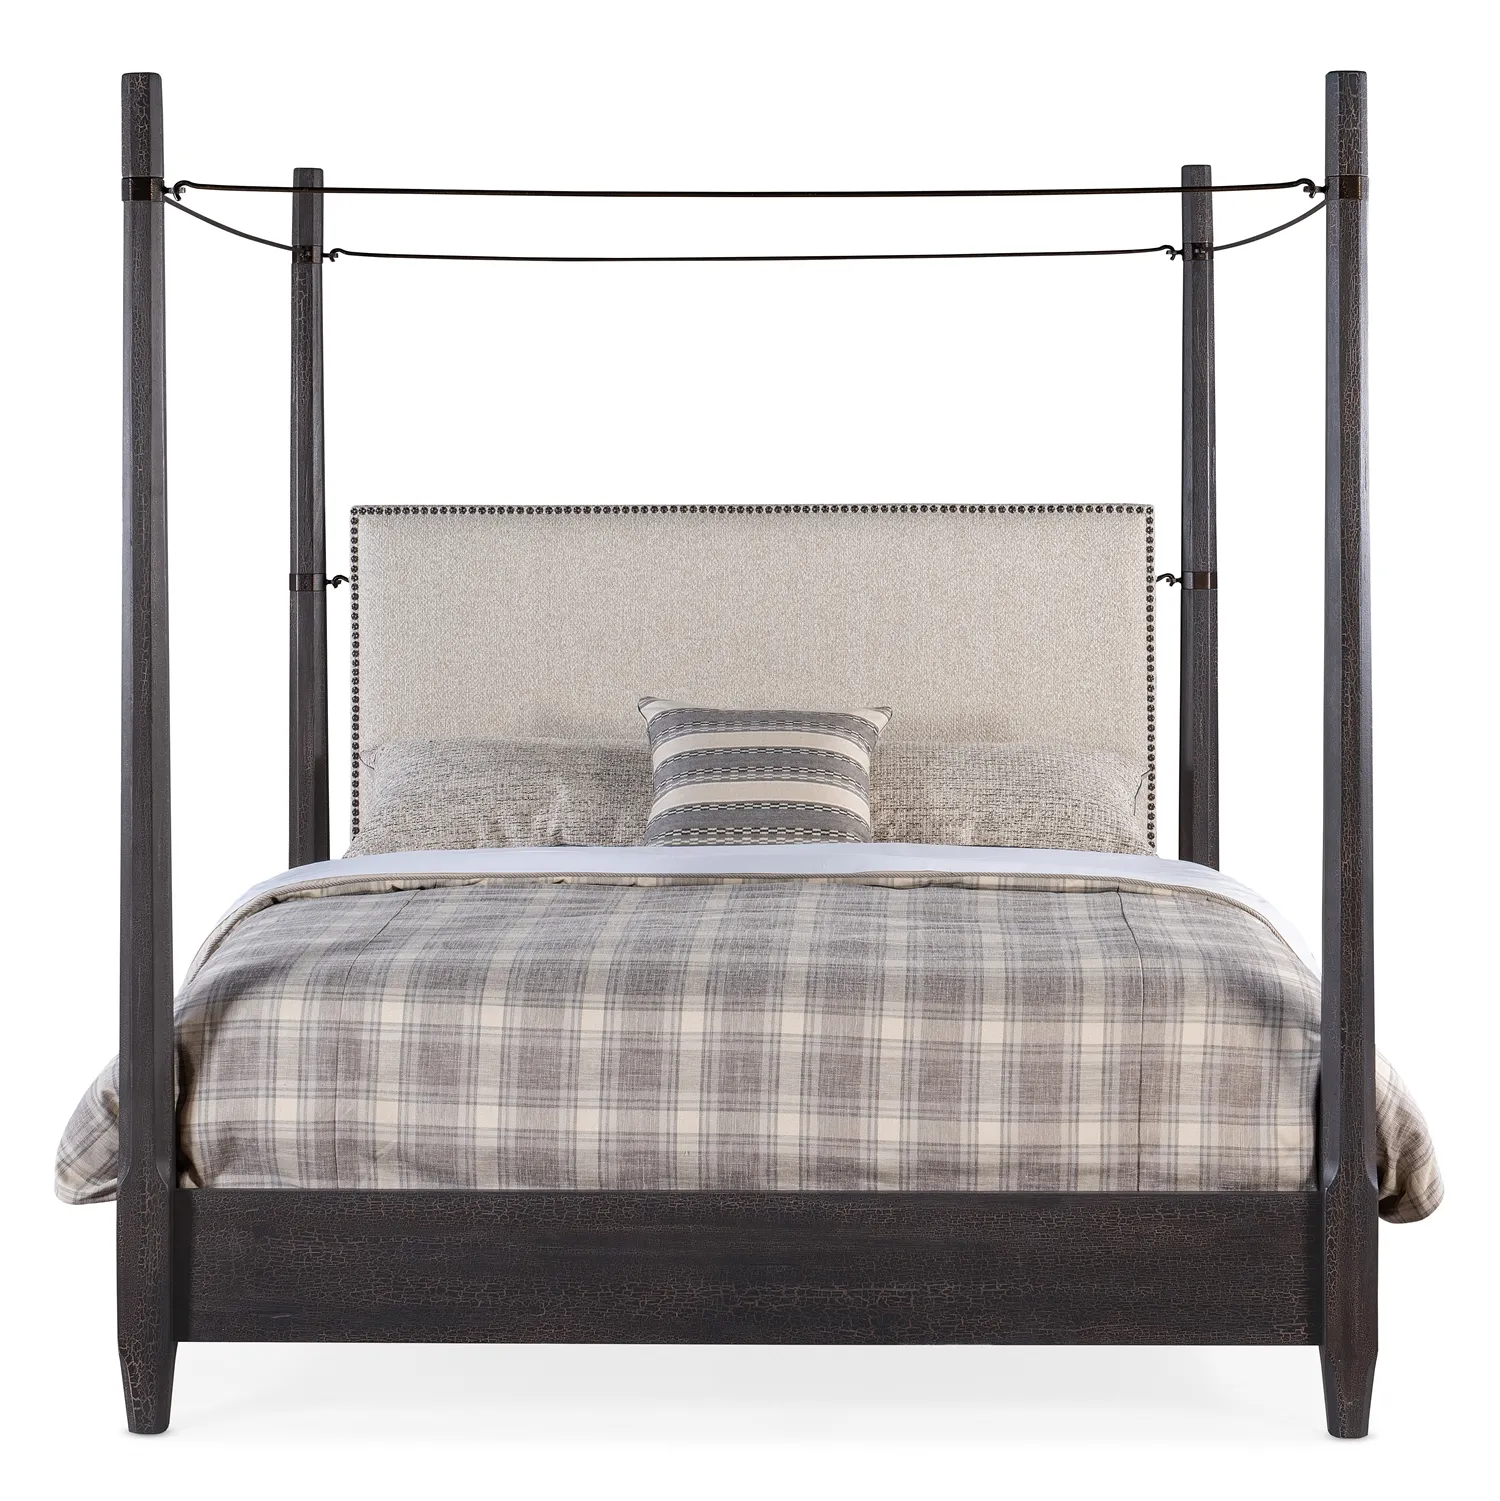 BIG SKY KING POSTER BED WITH CANOPY